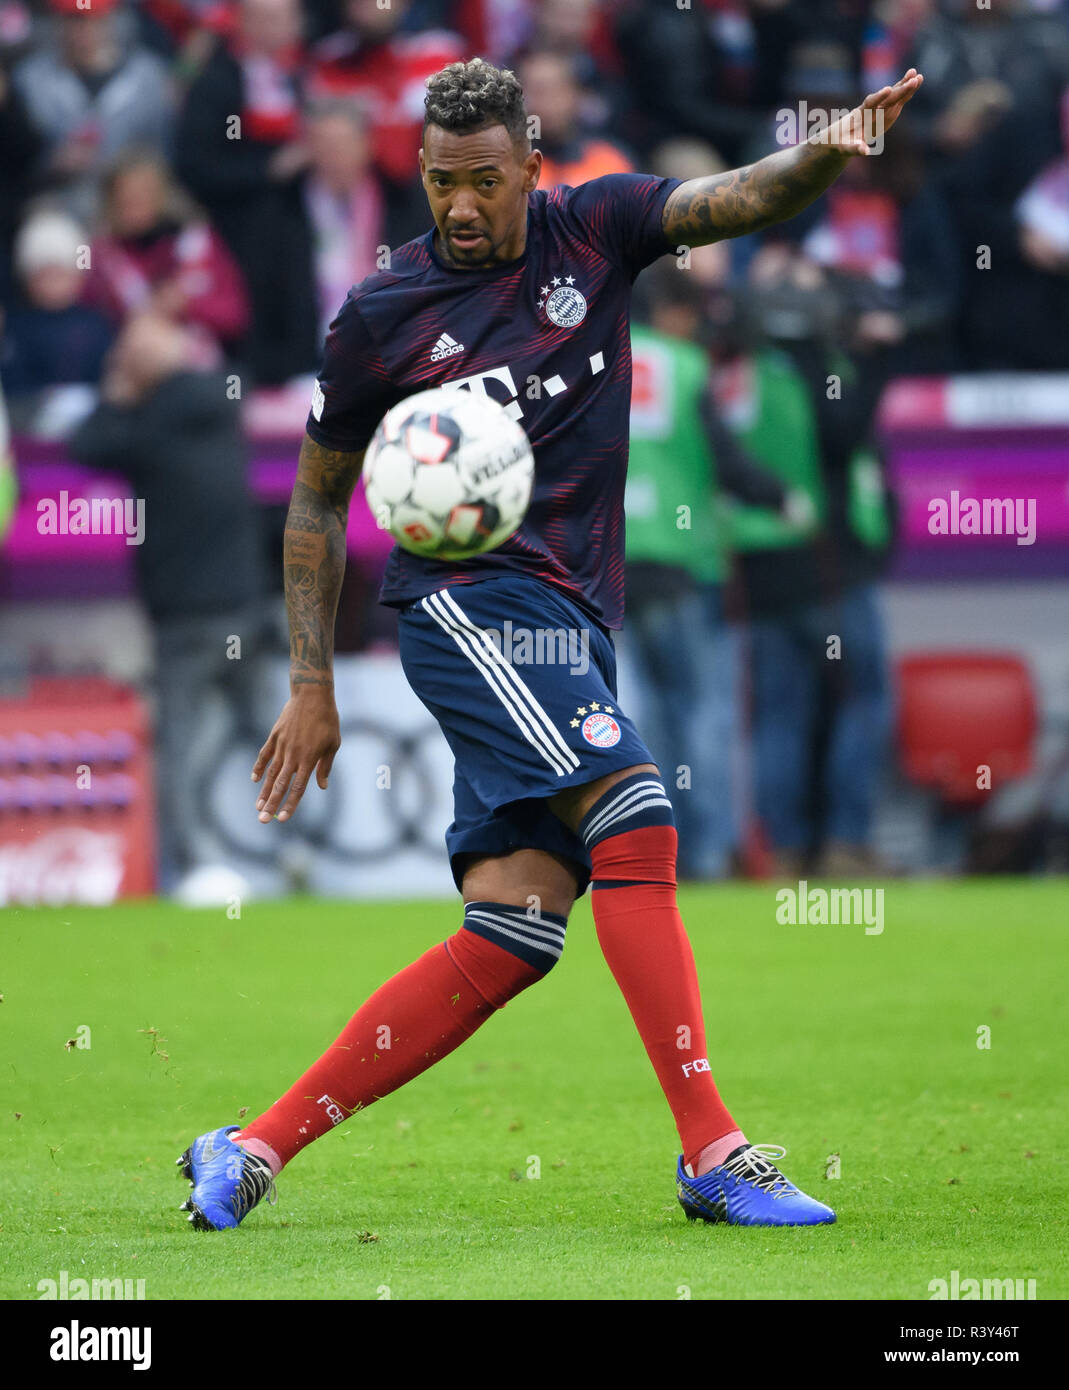 24 November 2018, Bavaria, München: Soccer: Bundesliga, Bayern Munich - Fortuna Düsseldorf, 12th matchday in the Allianz Arena. Jerome Boateng from Munich warms up. Photo: Sven Hoppe/dpa - IMPORTANT NOTE: In accordance with the requirements of the DFL Deutsche Fußball Liga or the DFB Deutscher Fußball-Bund, it is prohibited to use or have used photographs taken in the stadium and/or the match in the form of sequence images and/or video-like photo sequences. Stock Photo